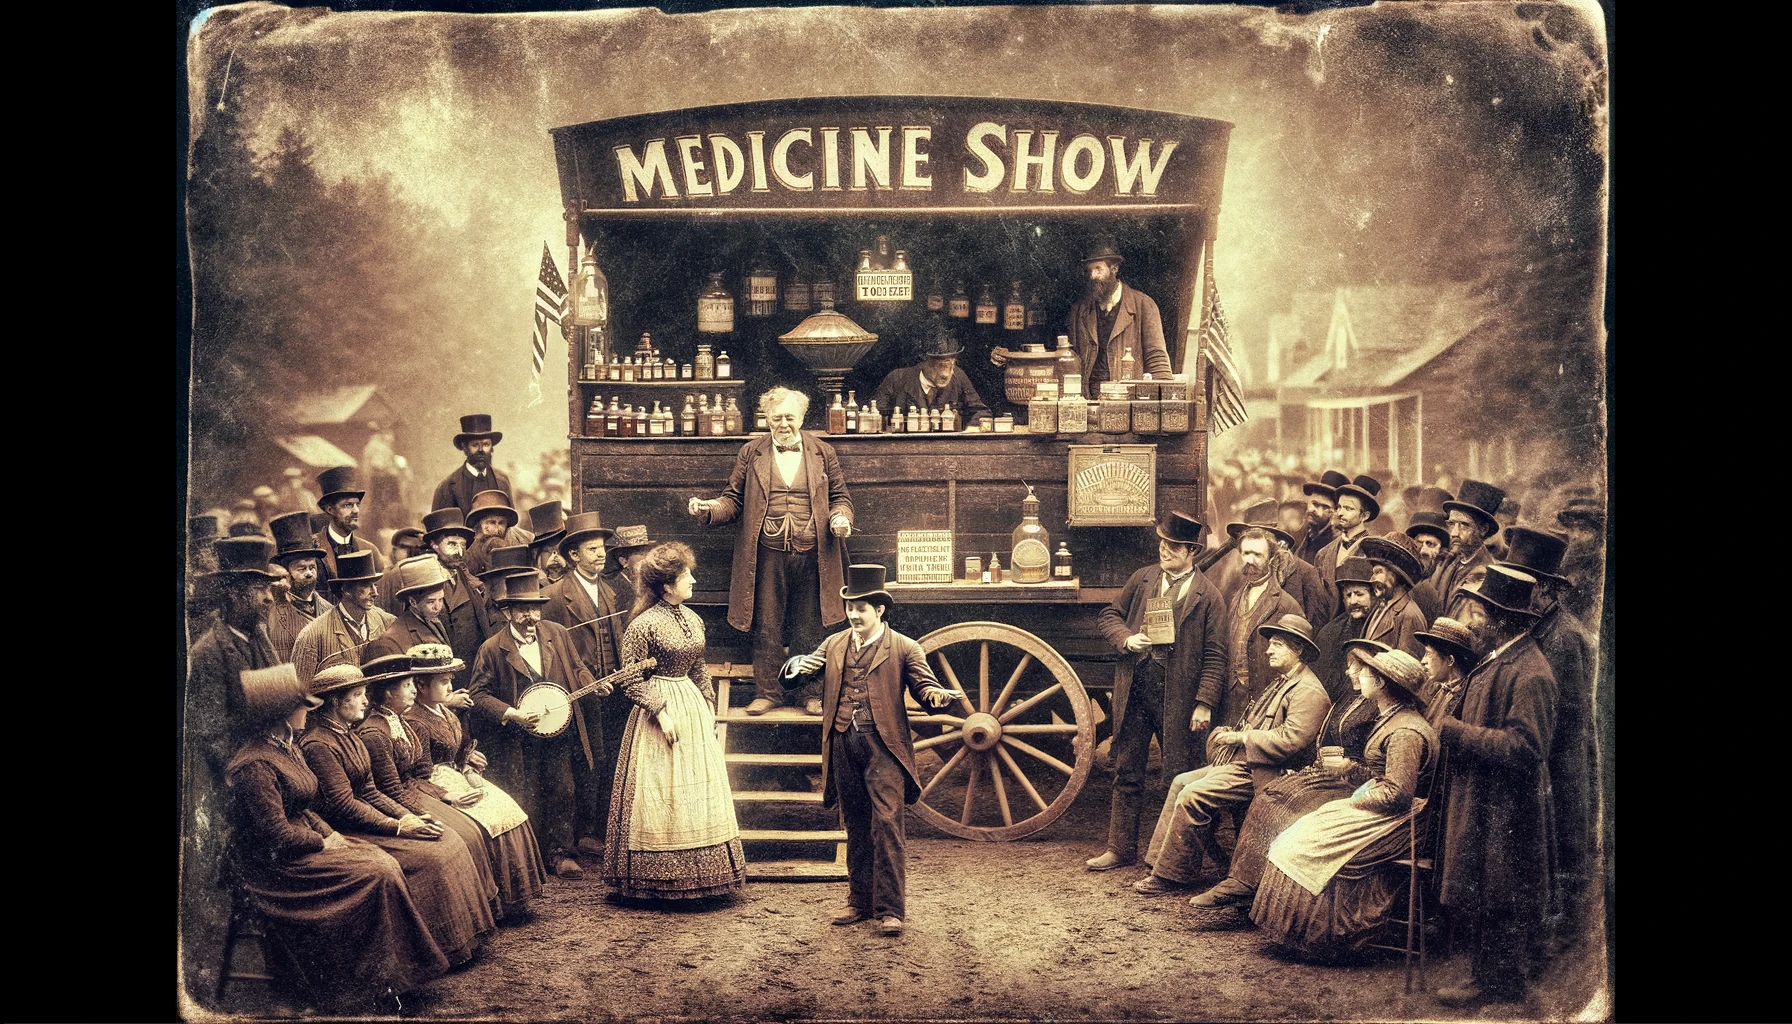 The Origin of Cocktails and the Glorious Medicine Show!